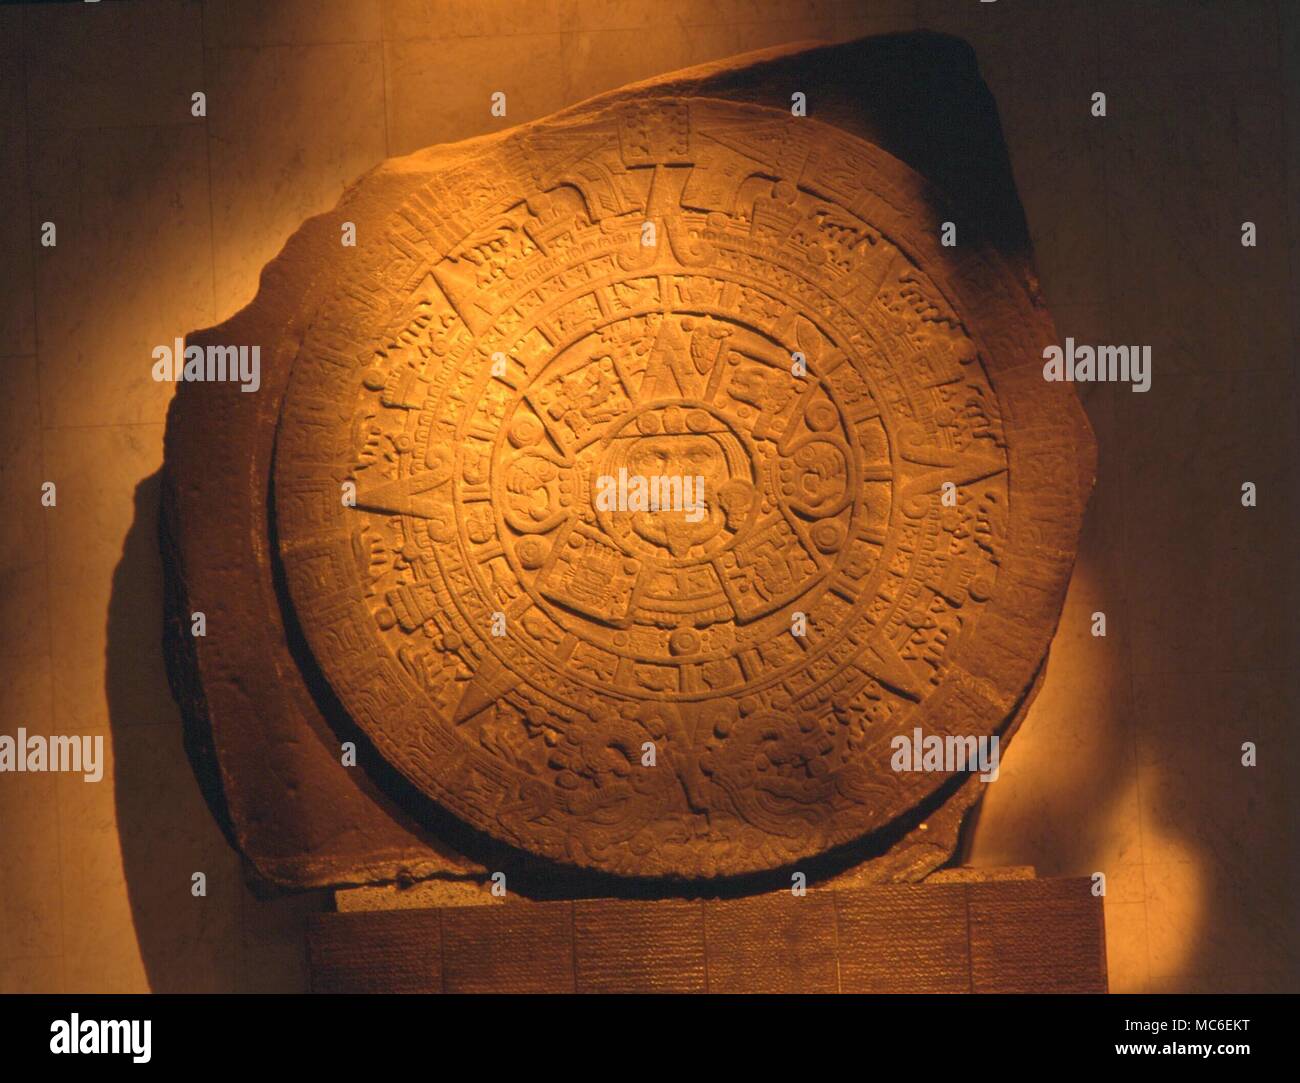 CALENDARS - Aztec Calendar stone. The Aztec Sun Stone, or Calendar, which weighs 24 tons, and is almost 12 feet in diameter. The face of Tonatiuh, the Sun God, is in the centre. In the National Anthropological Museum, Mexico City Stock Photo